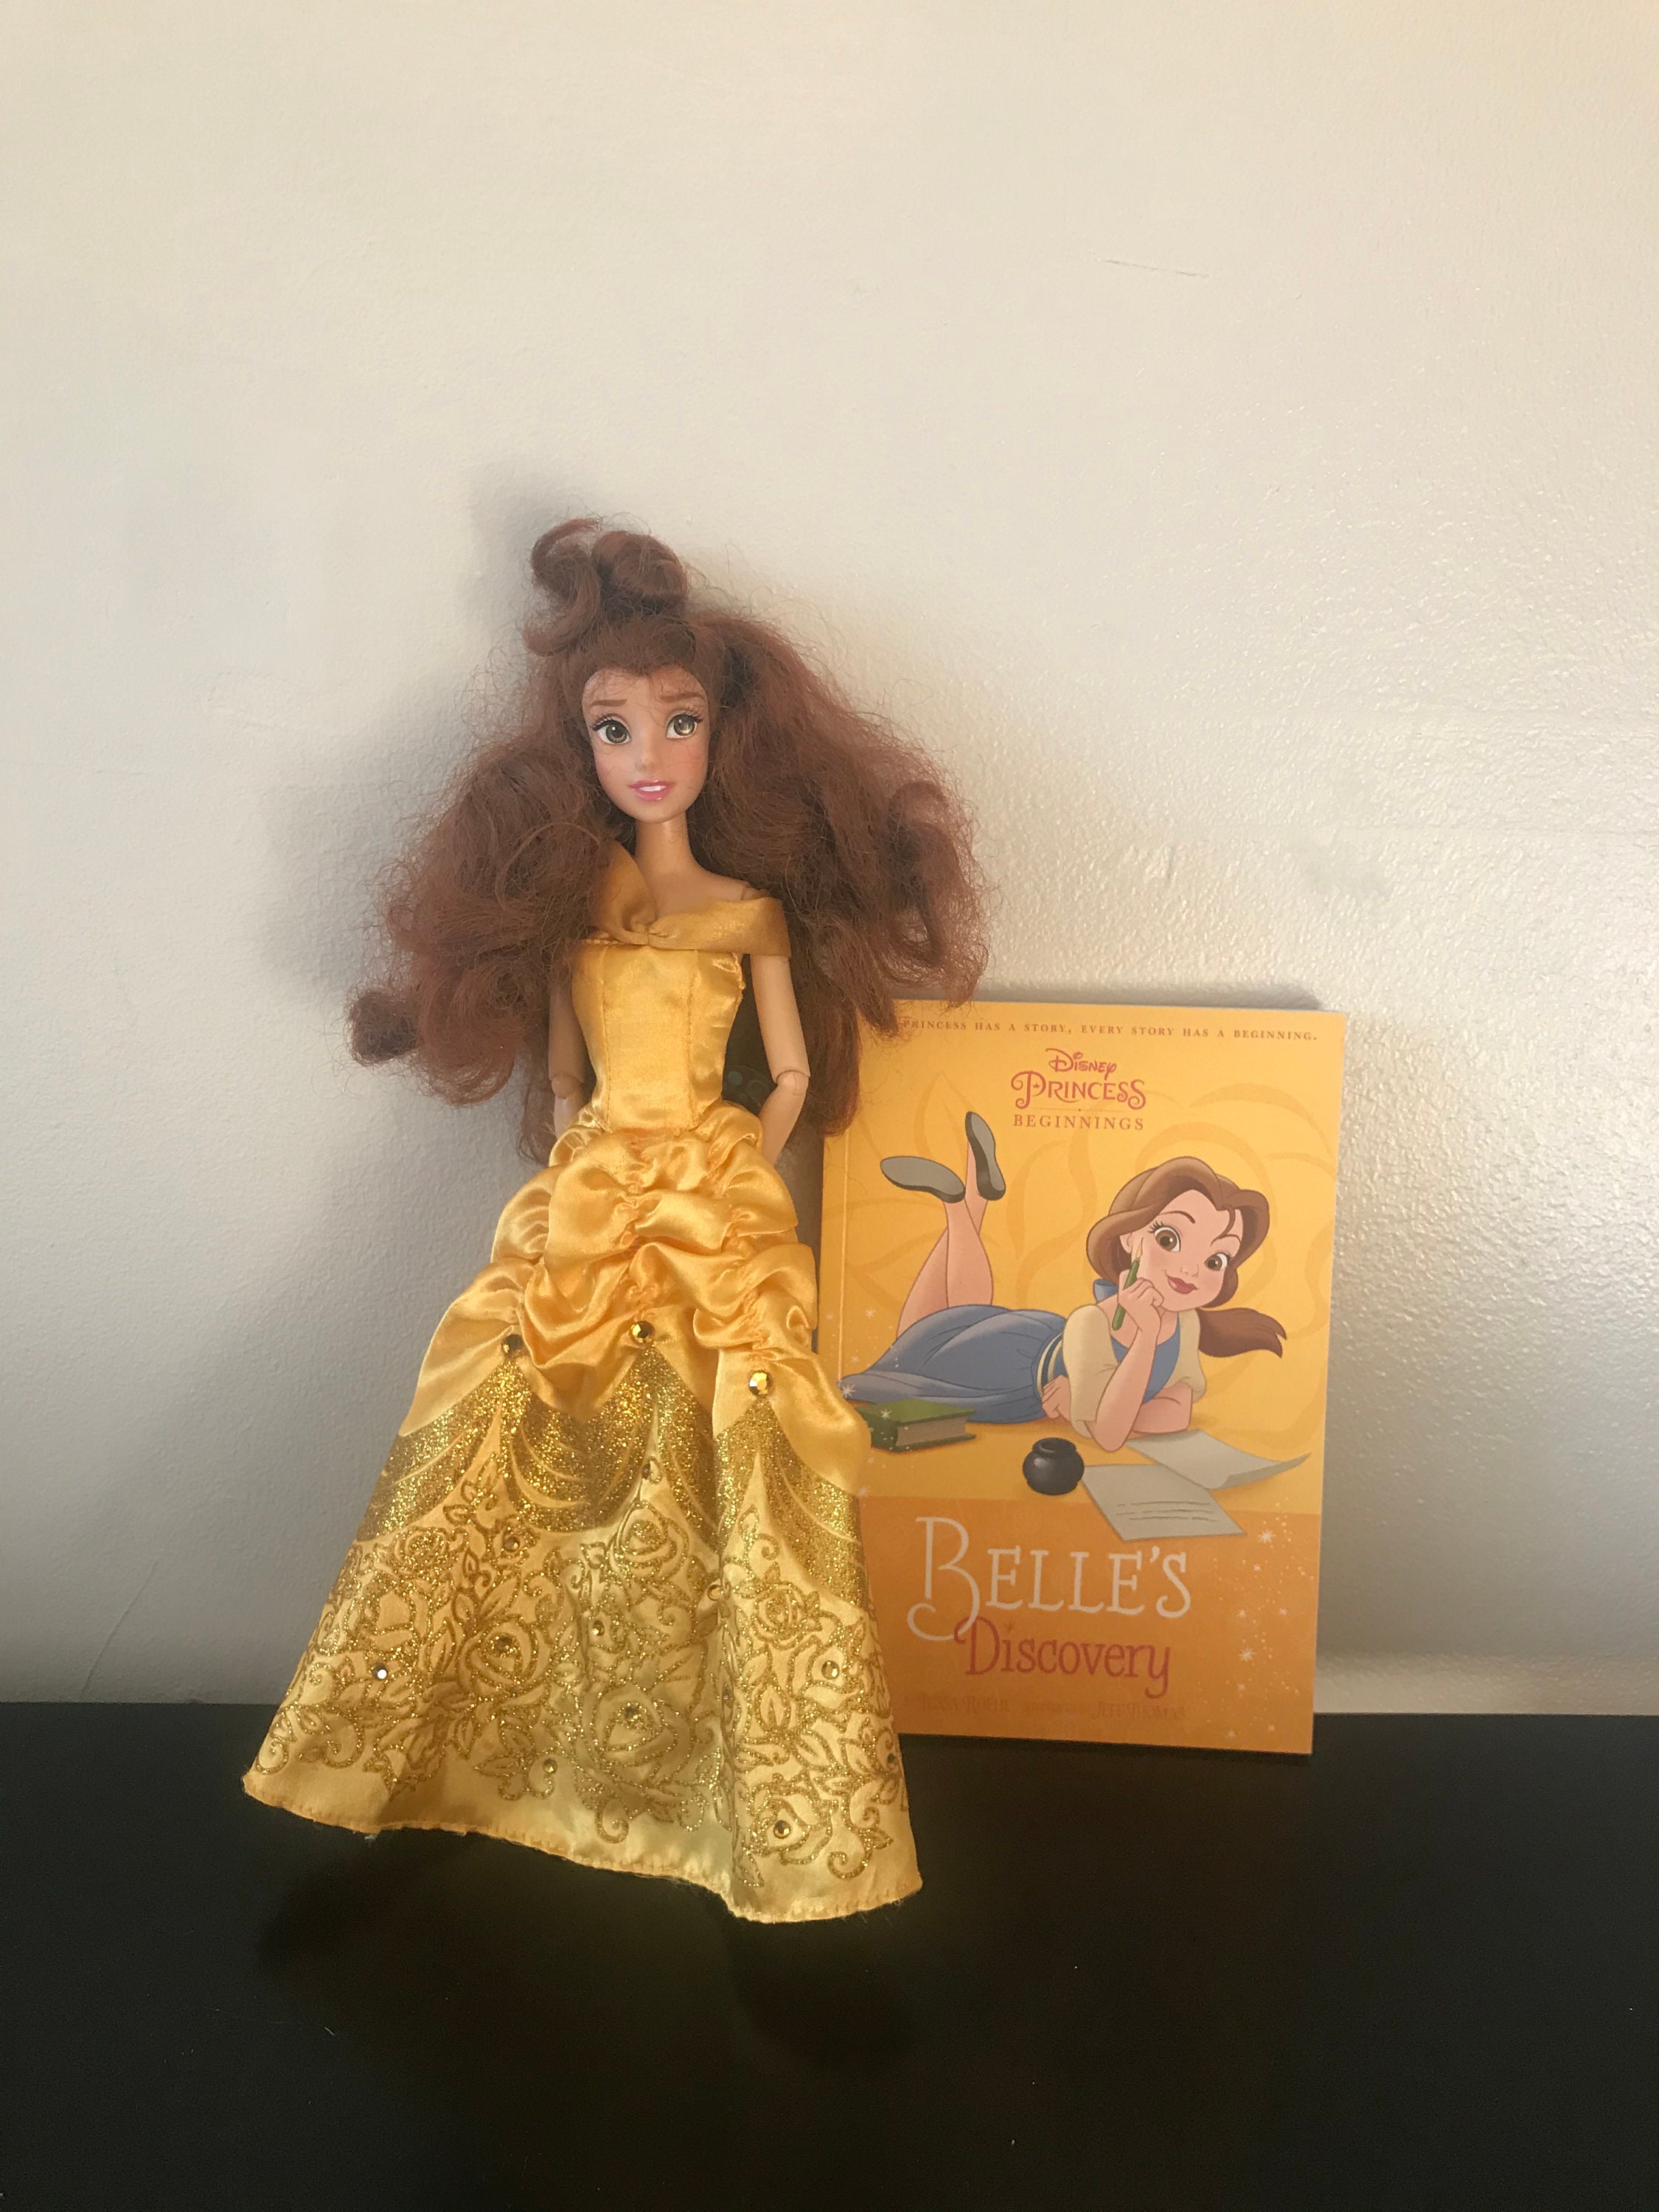 Beauty and the beast Disney princess belle doll and book bundle